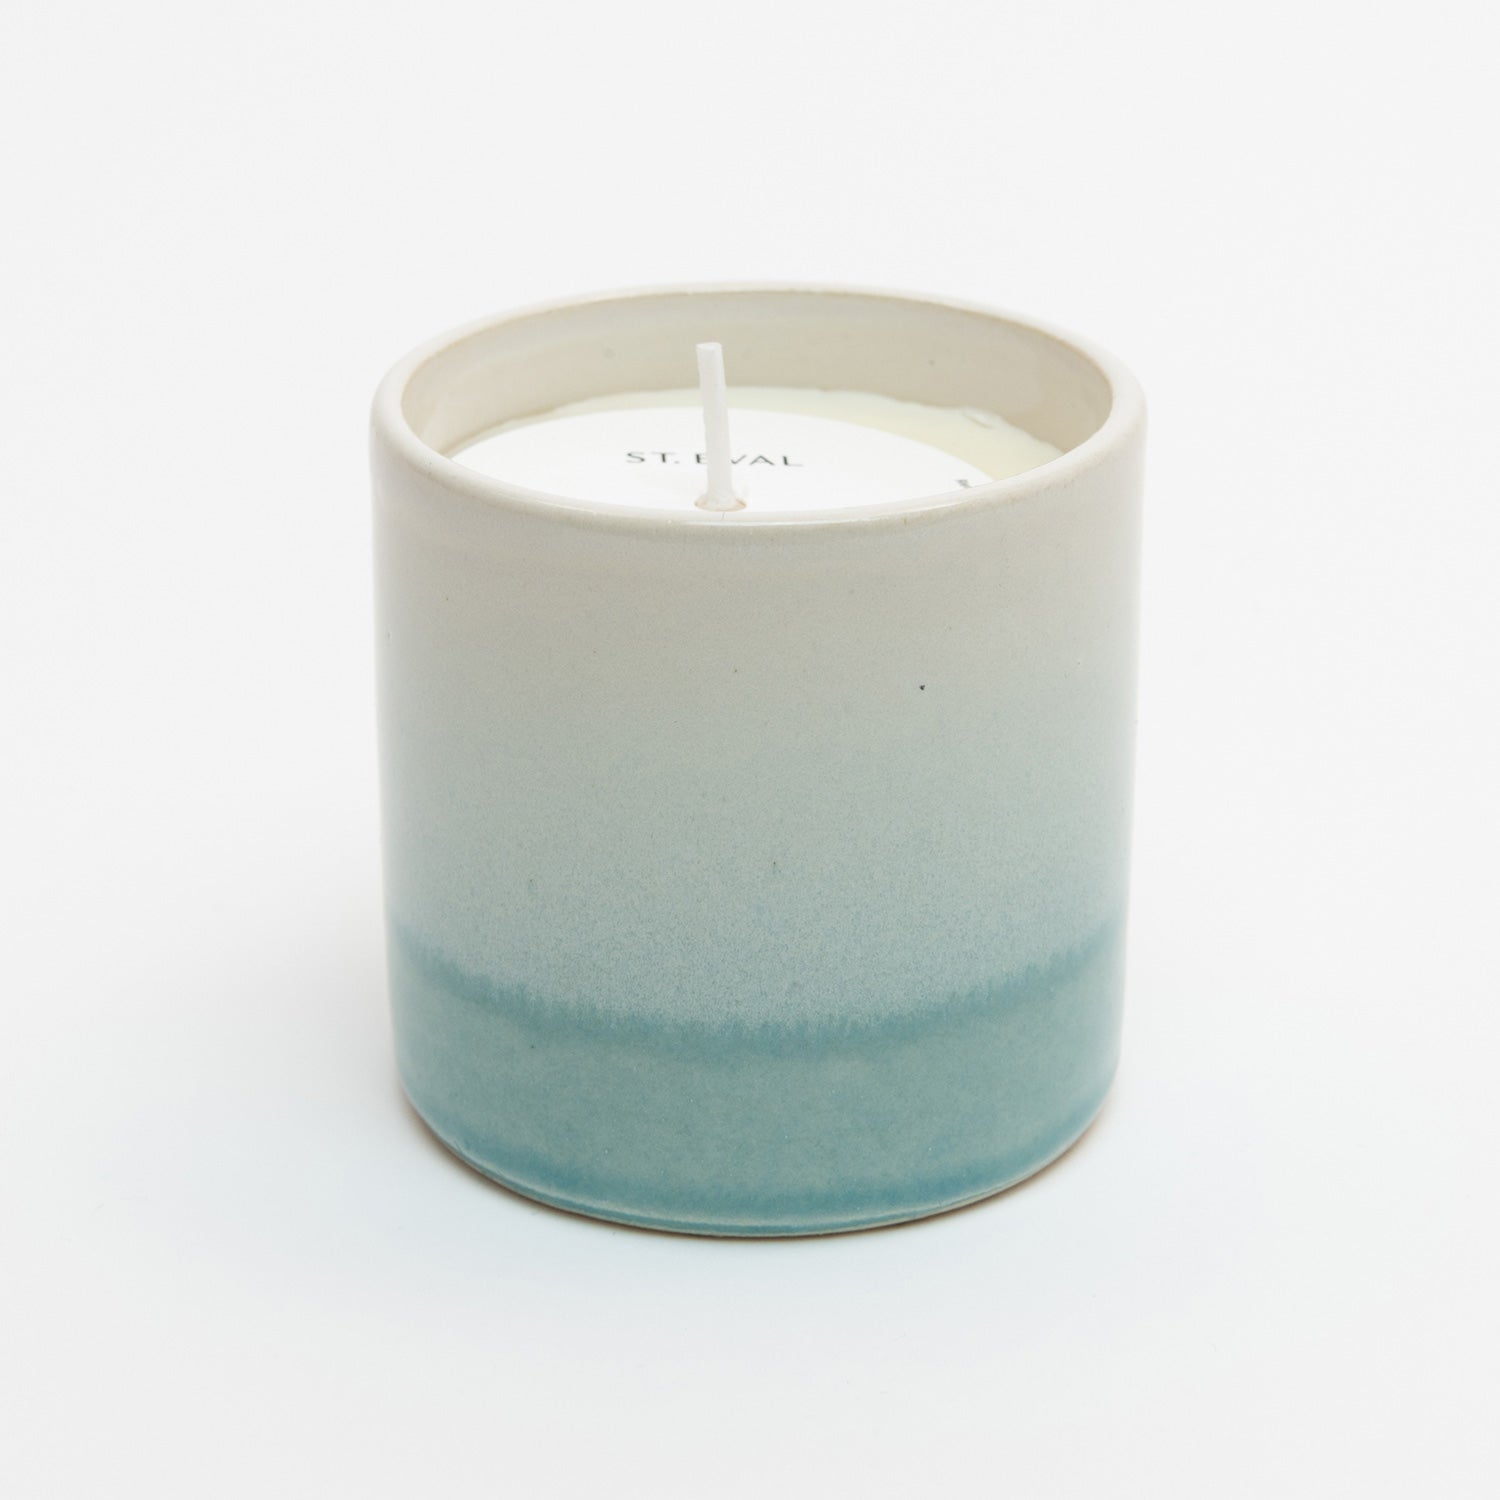 St Eval Sea & Shore Salt candle pot. Stoneware ceramic pot. Cream top fading to pale blue ring at base. St Eval card circle protector on top of candle with wick standing tall.